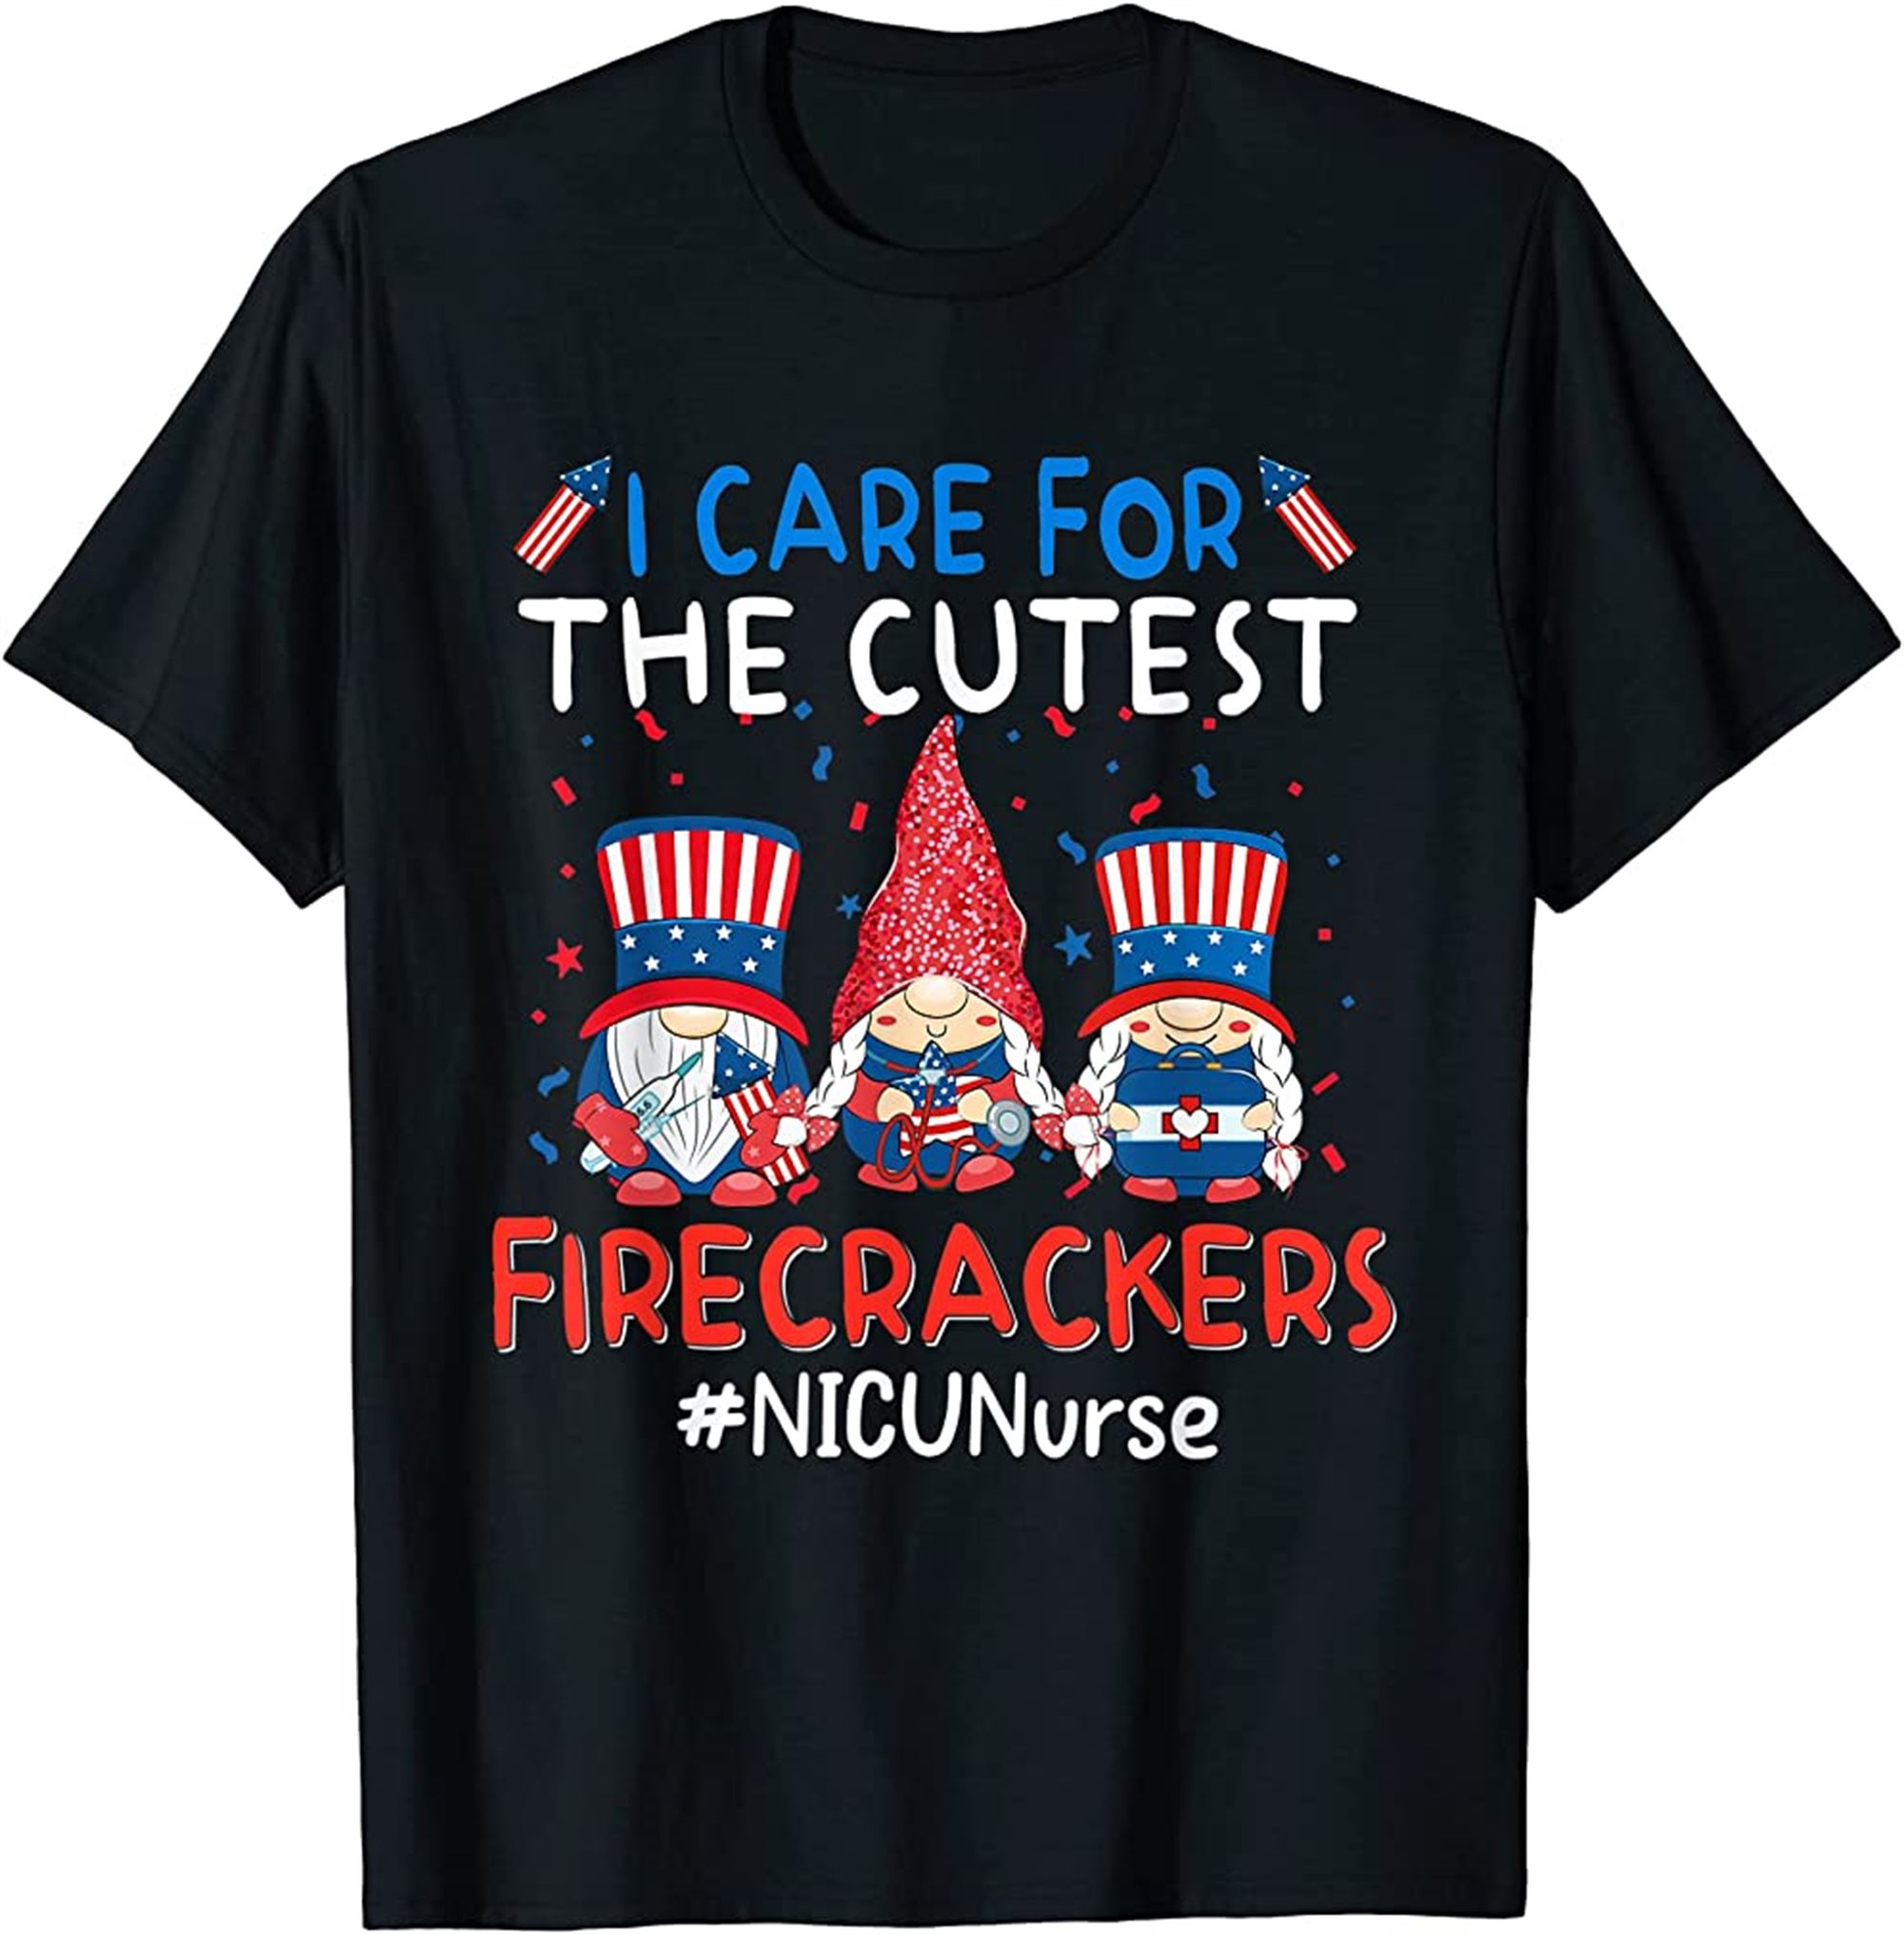 I Care For The Cutest Firecracker Nicu Nurse 4th Of July T-shirt Plus Size Up To 5xl